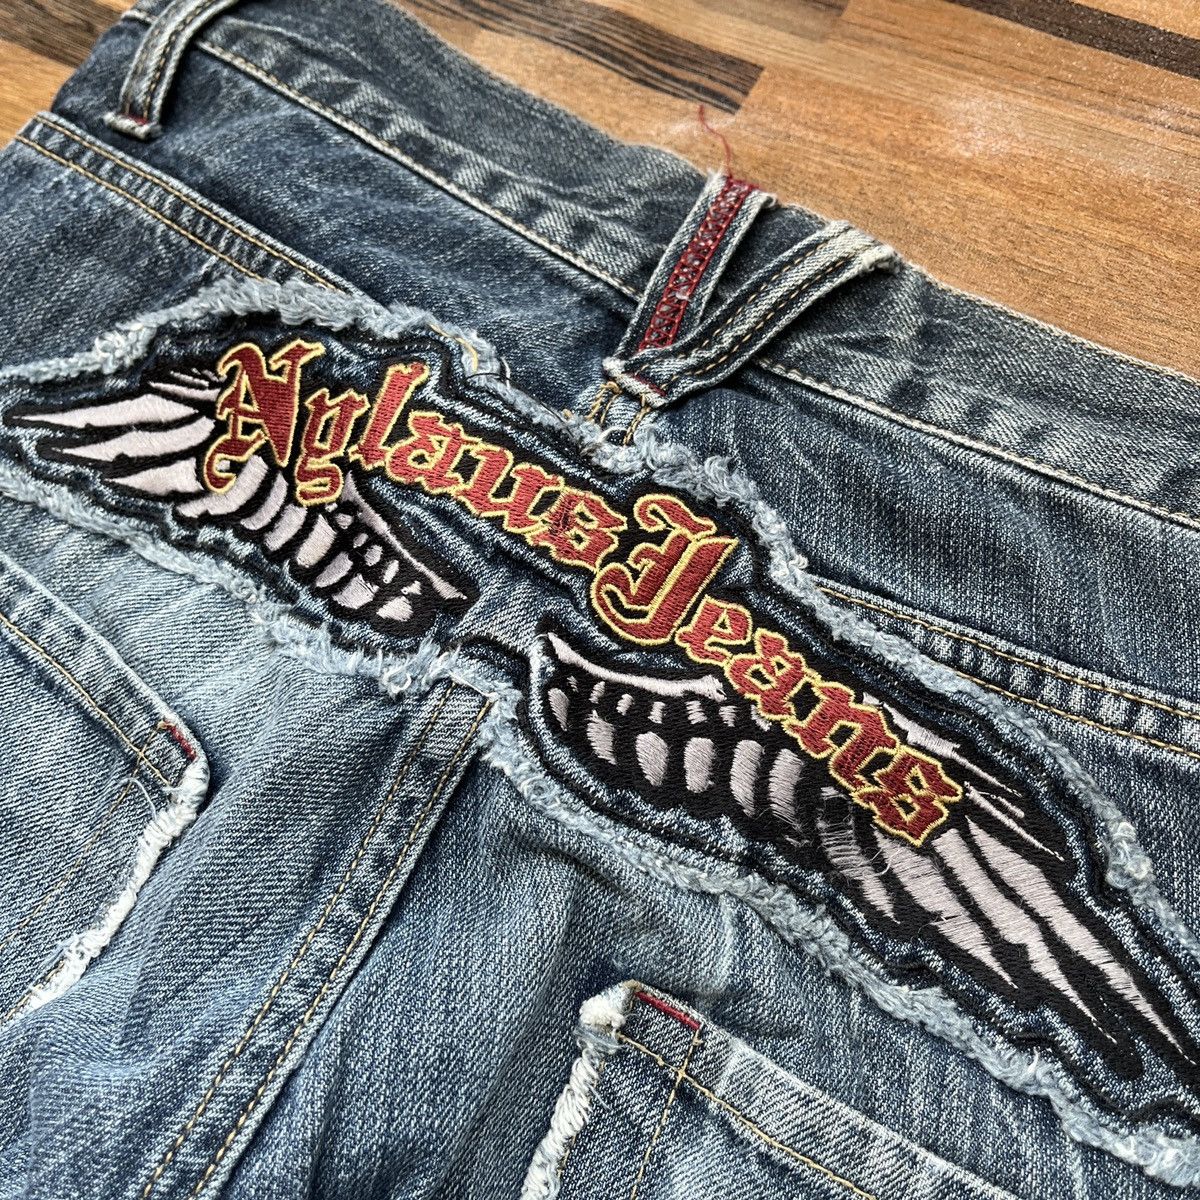 Japanese Brand - Nylaus Clothing Hysteric Style Denim Jeans Seditionaries - 17